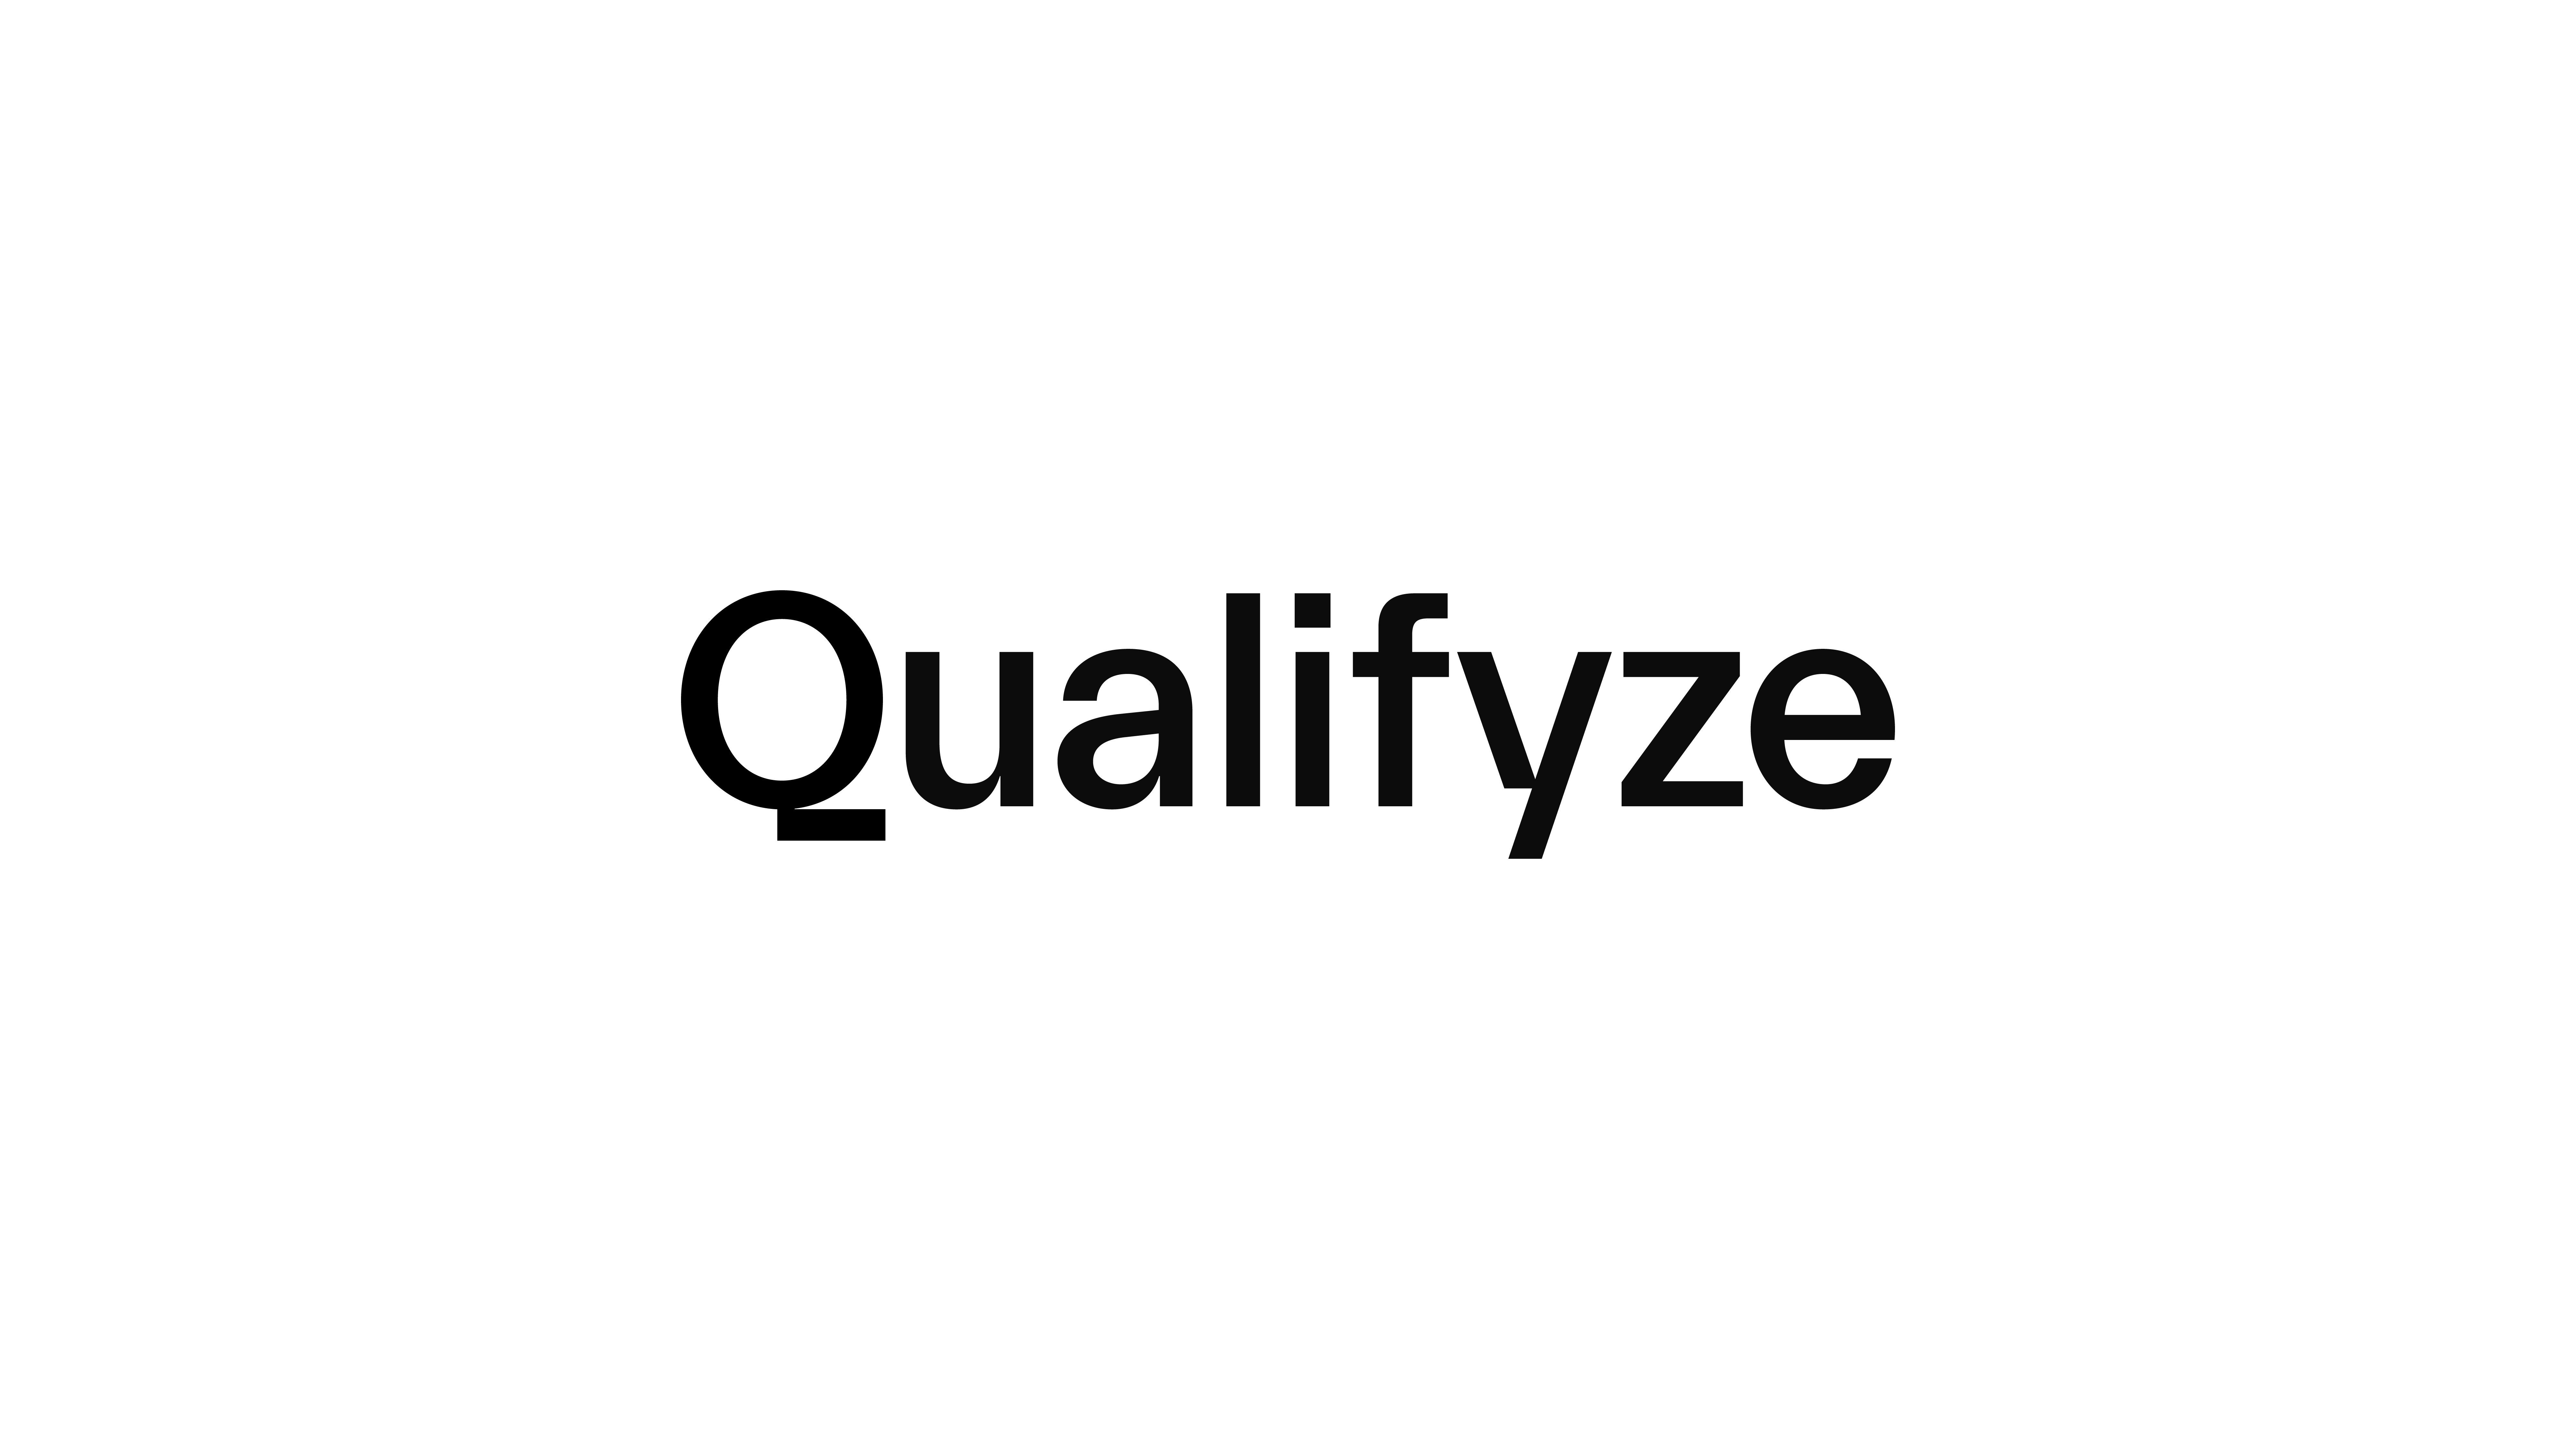 Qualifyze unveils new look for fast-growing audit company